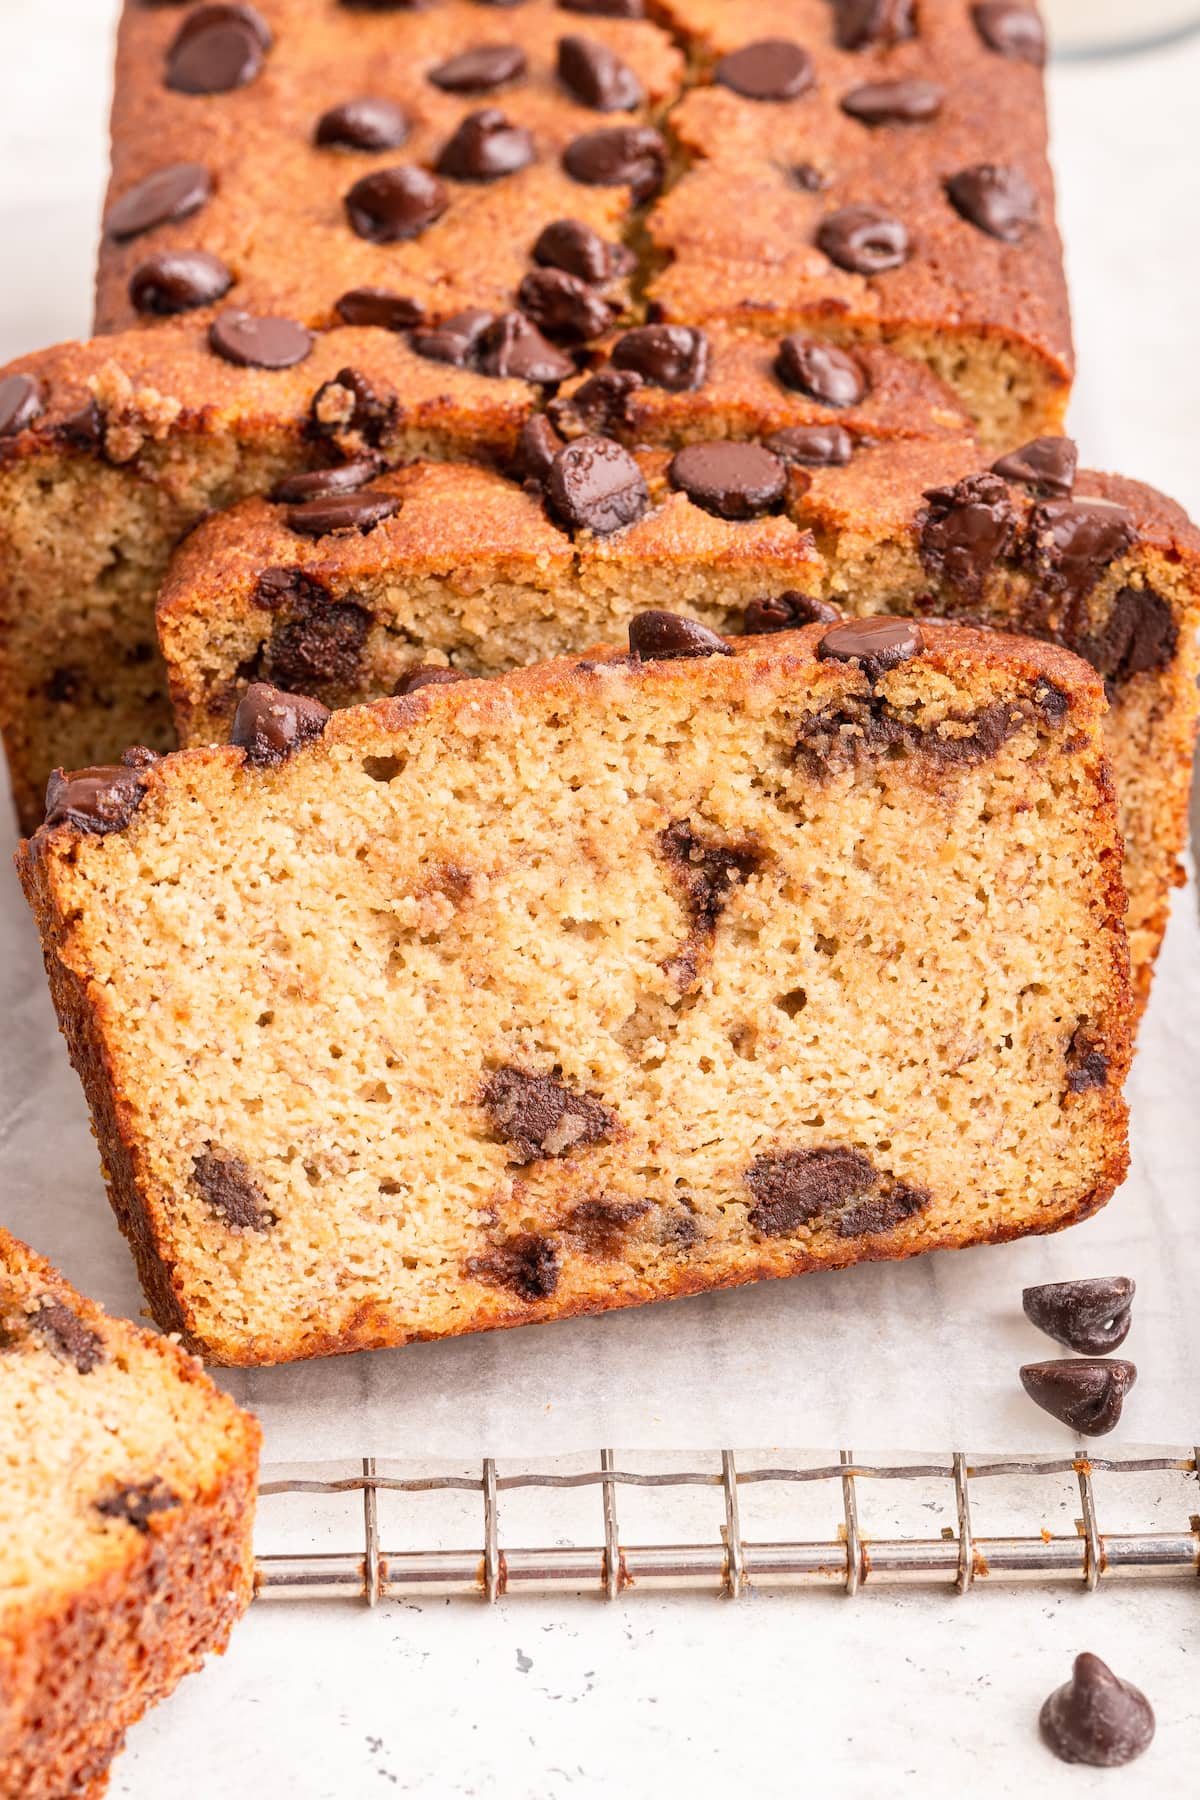 Almond flour banana bread with chocolate chips, on a wire rack.